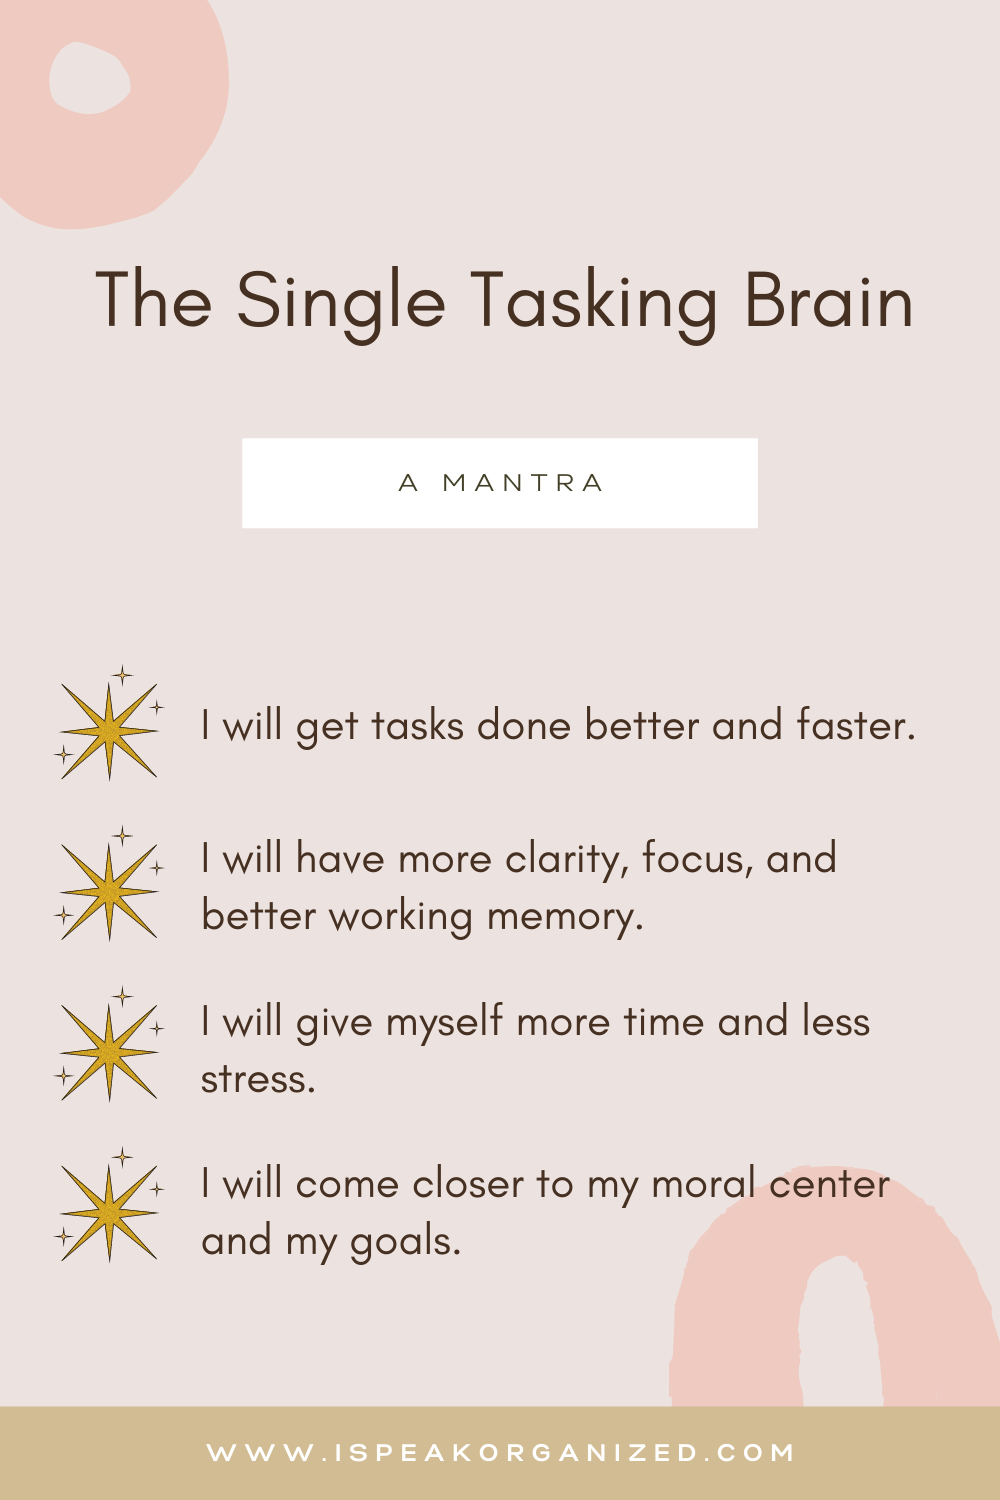 Single-tasking: A neuroscientist's guide to doing one thing at a time